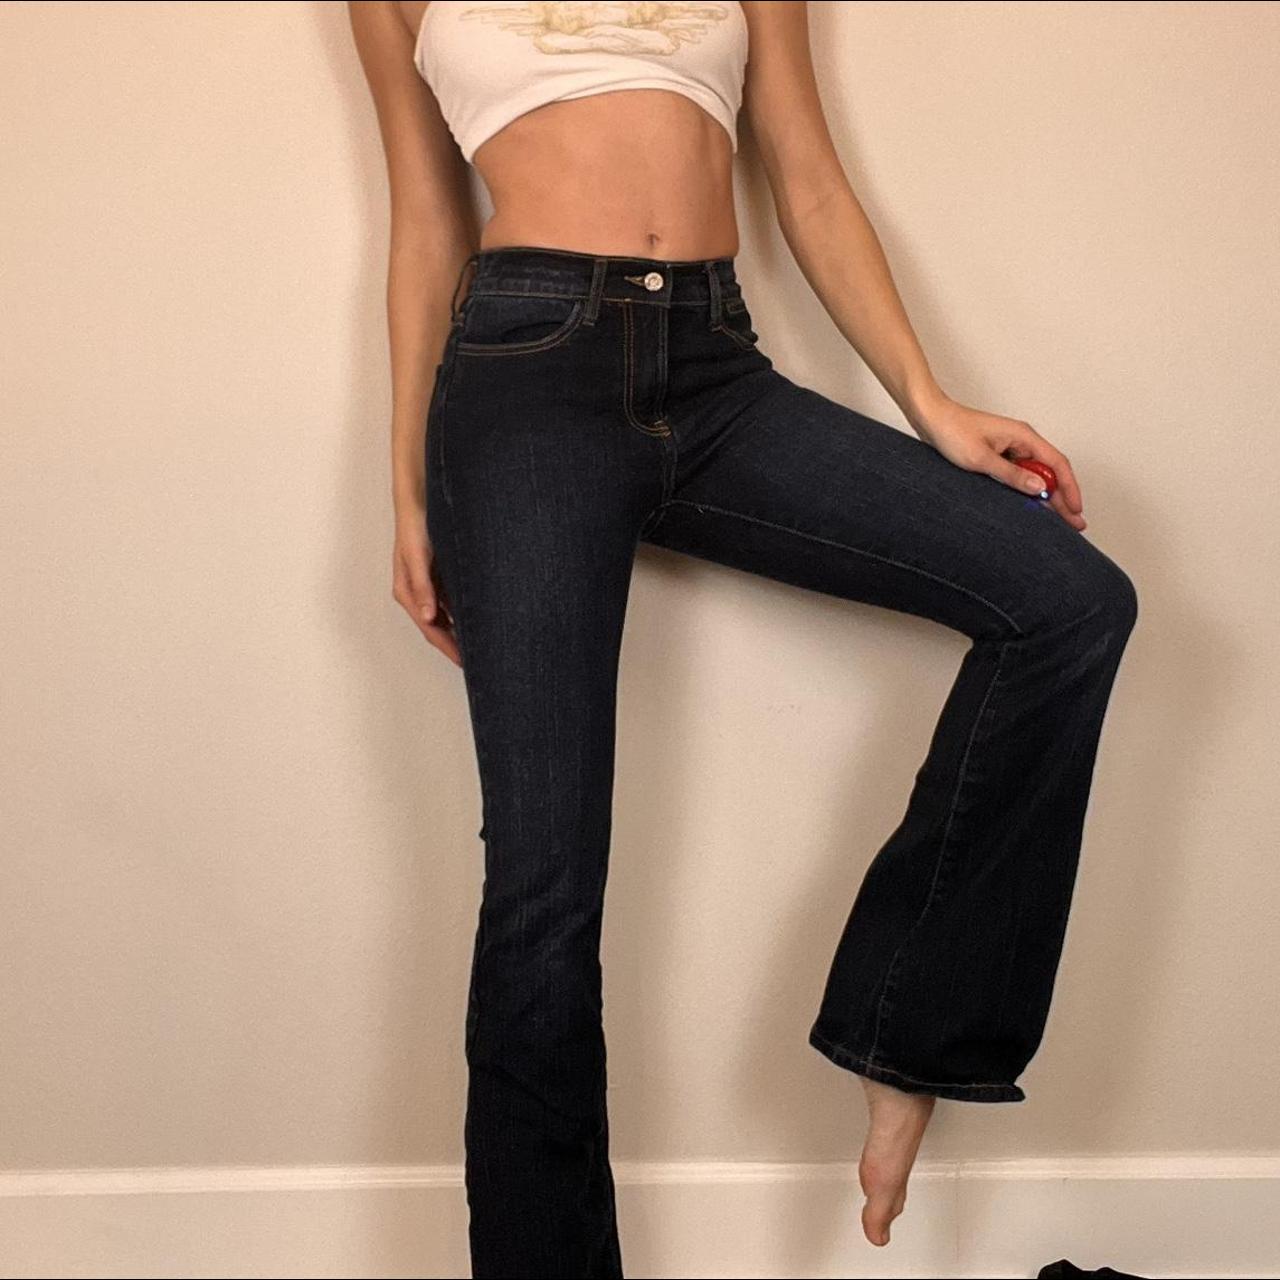 These 5 Rare Brandy Melville Items Are TERRIBLE Quality